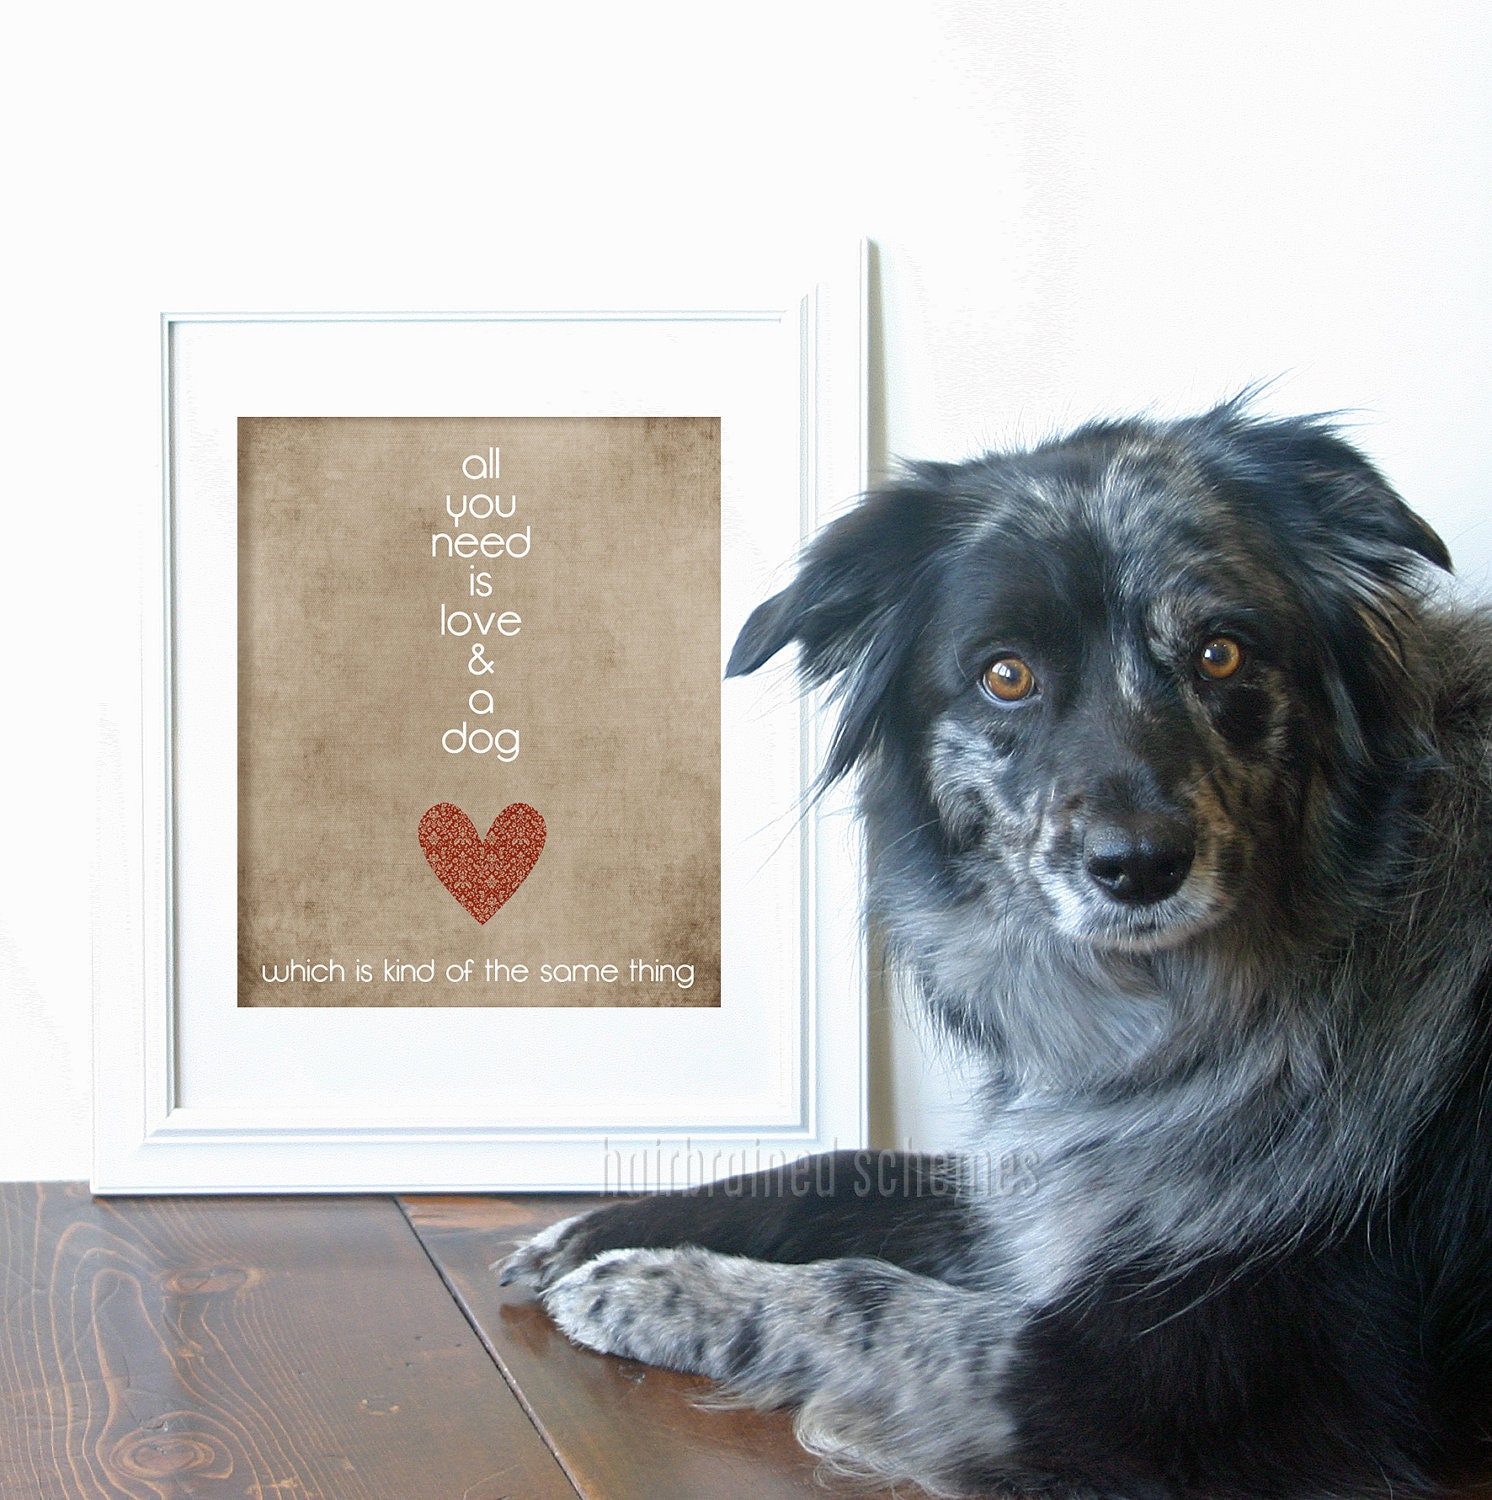 Digital Art Print All You Need is Love and a Dog Typography Poster Rustic Brown Red HeartValentines Day - hairbrainedschemes